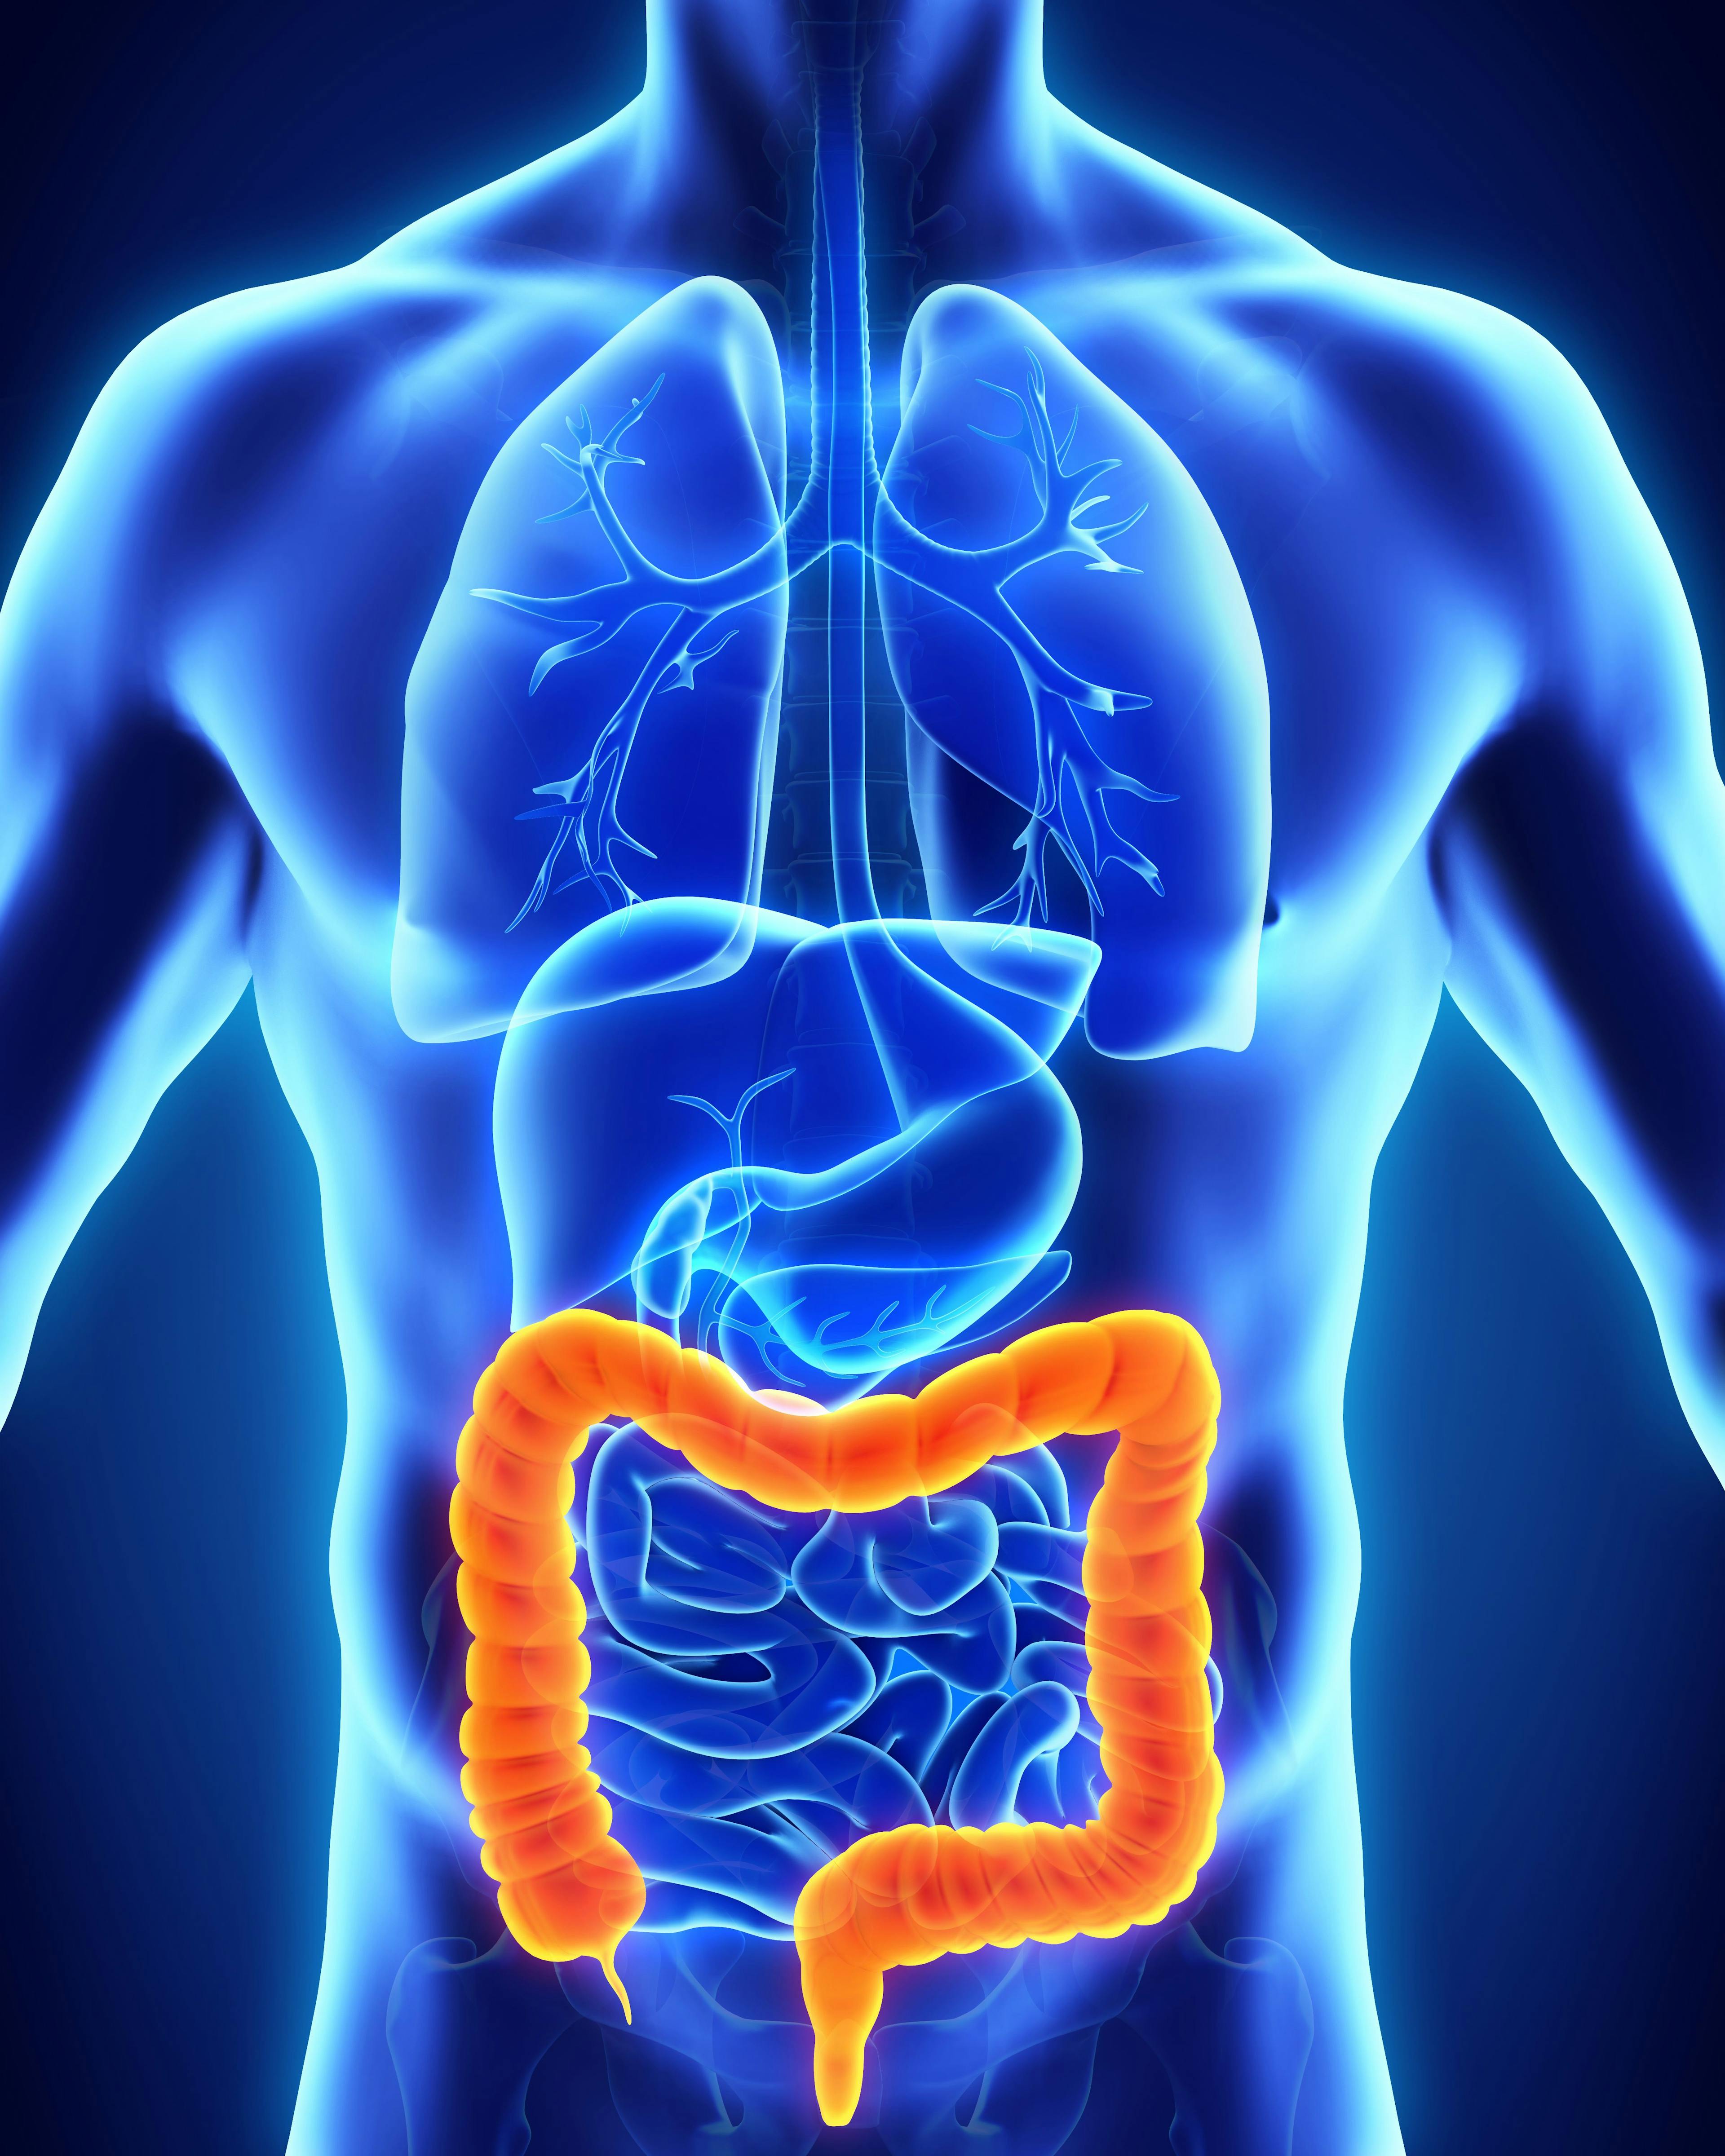 Development on CYAD-101 continues as a treatment for patients with refractory/metastatic colorectal cancer after the FDA has lifted a clinical hold on the phase 1b CYAD-101-002 trial.